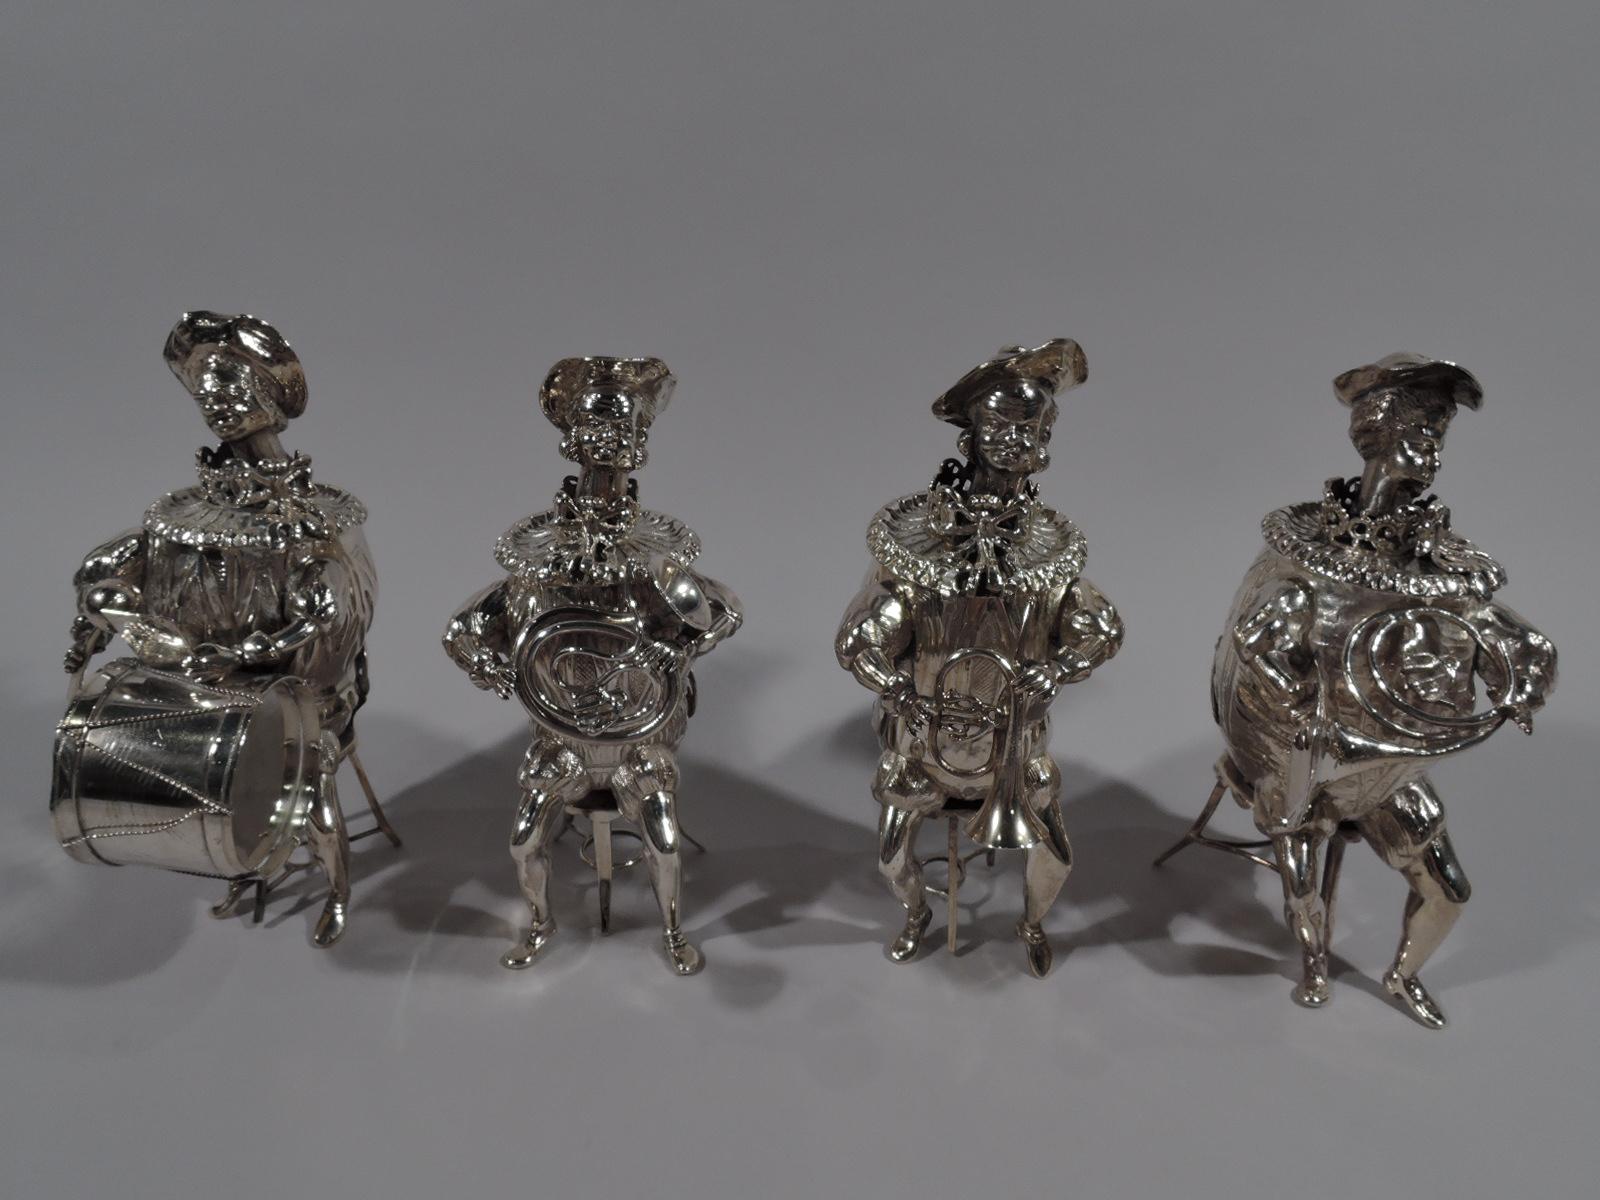 Set of 14 turn-of-the-century German sterling silver bobble-head musicians. A cymbal clanging, drum-beating, Horn-heavy band with a lone flautist and couple cellists thrown in. A raucous bunch. Rotund bodies squeezed into olden-days doublet-hose